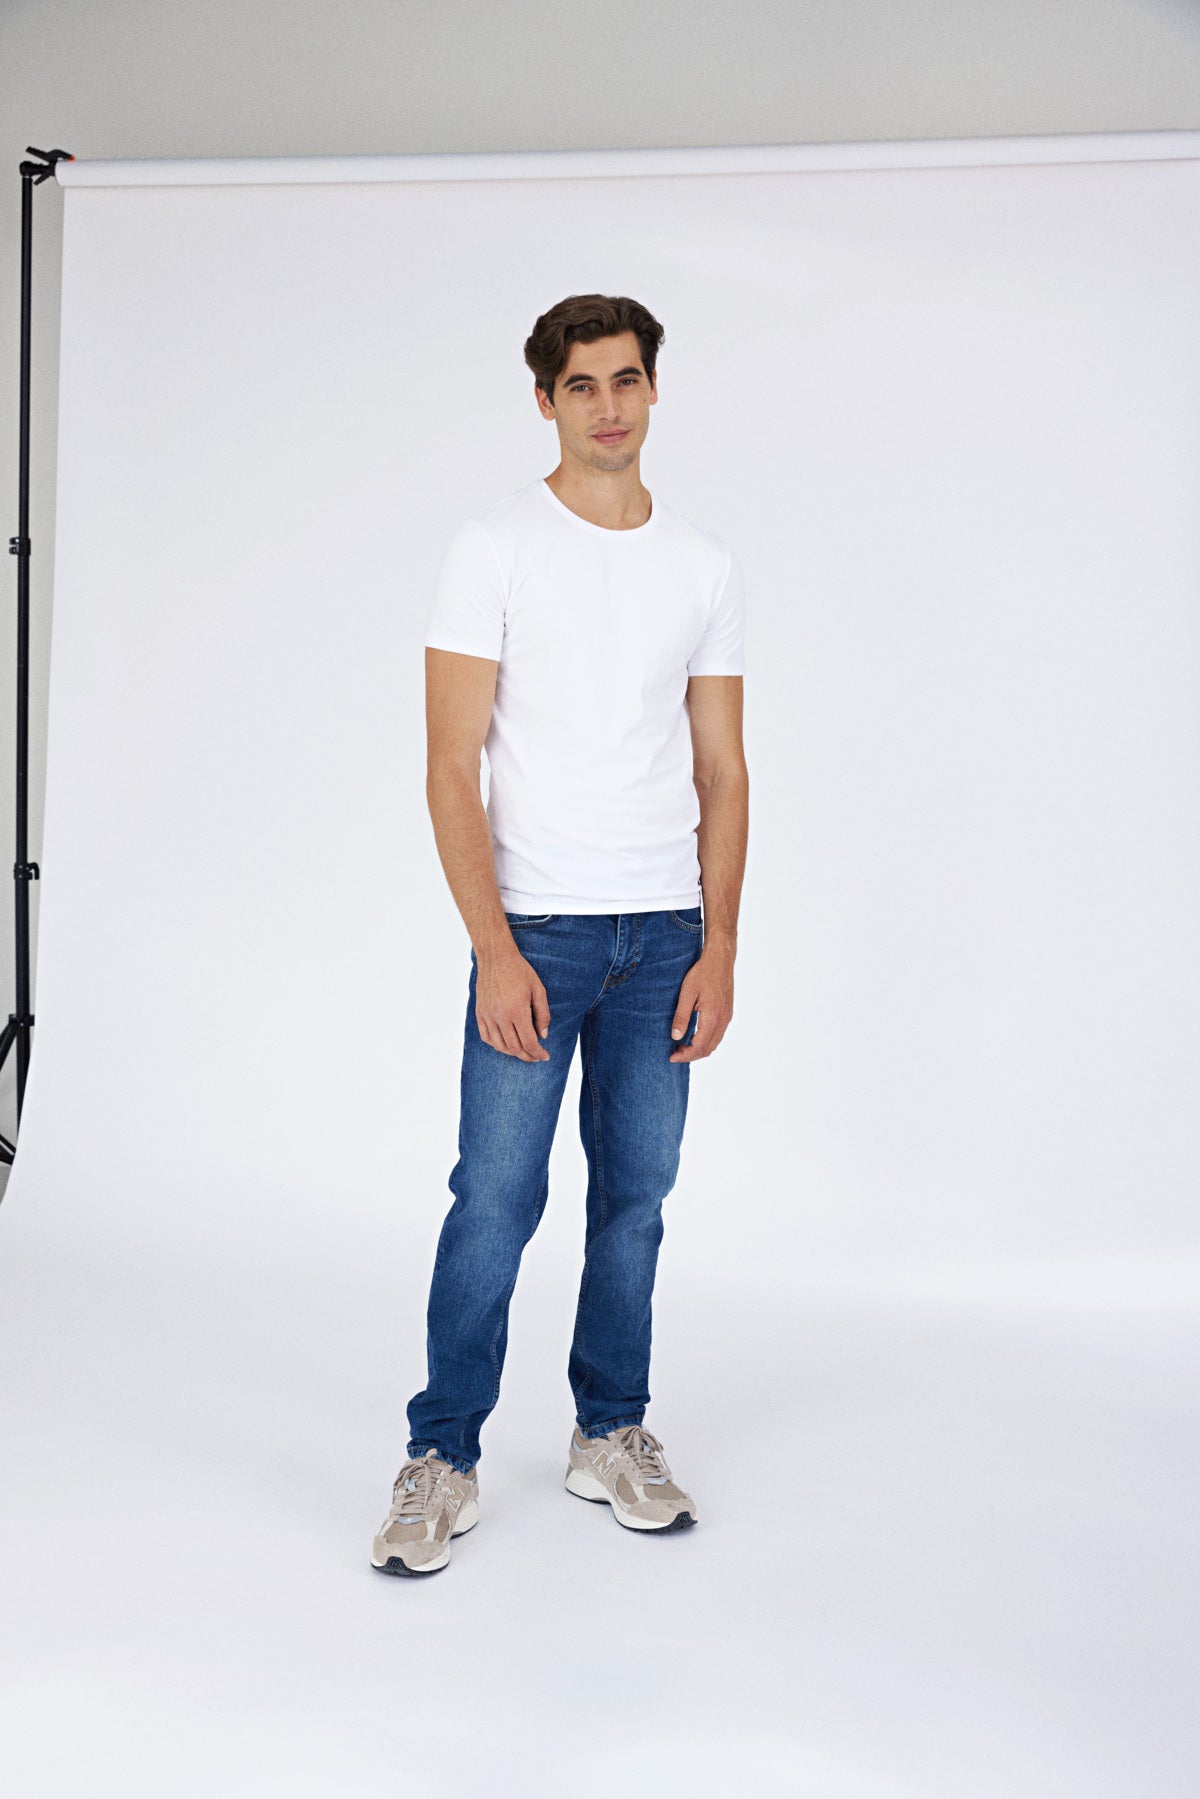 David Crew Neck T-shirt - Bright White - The Sons online